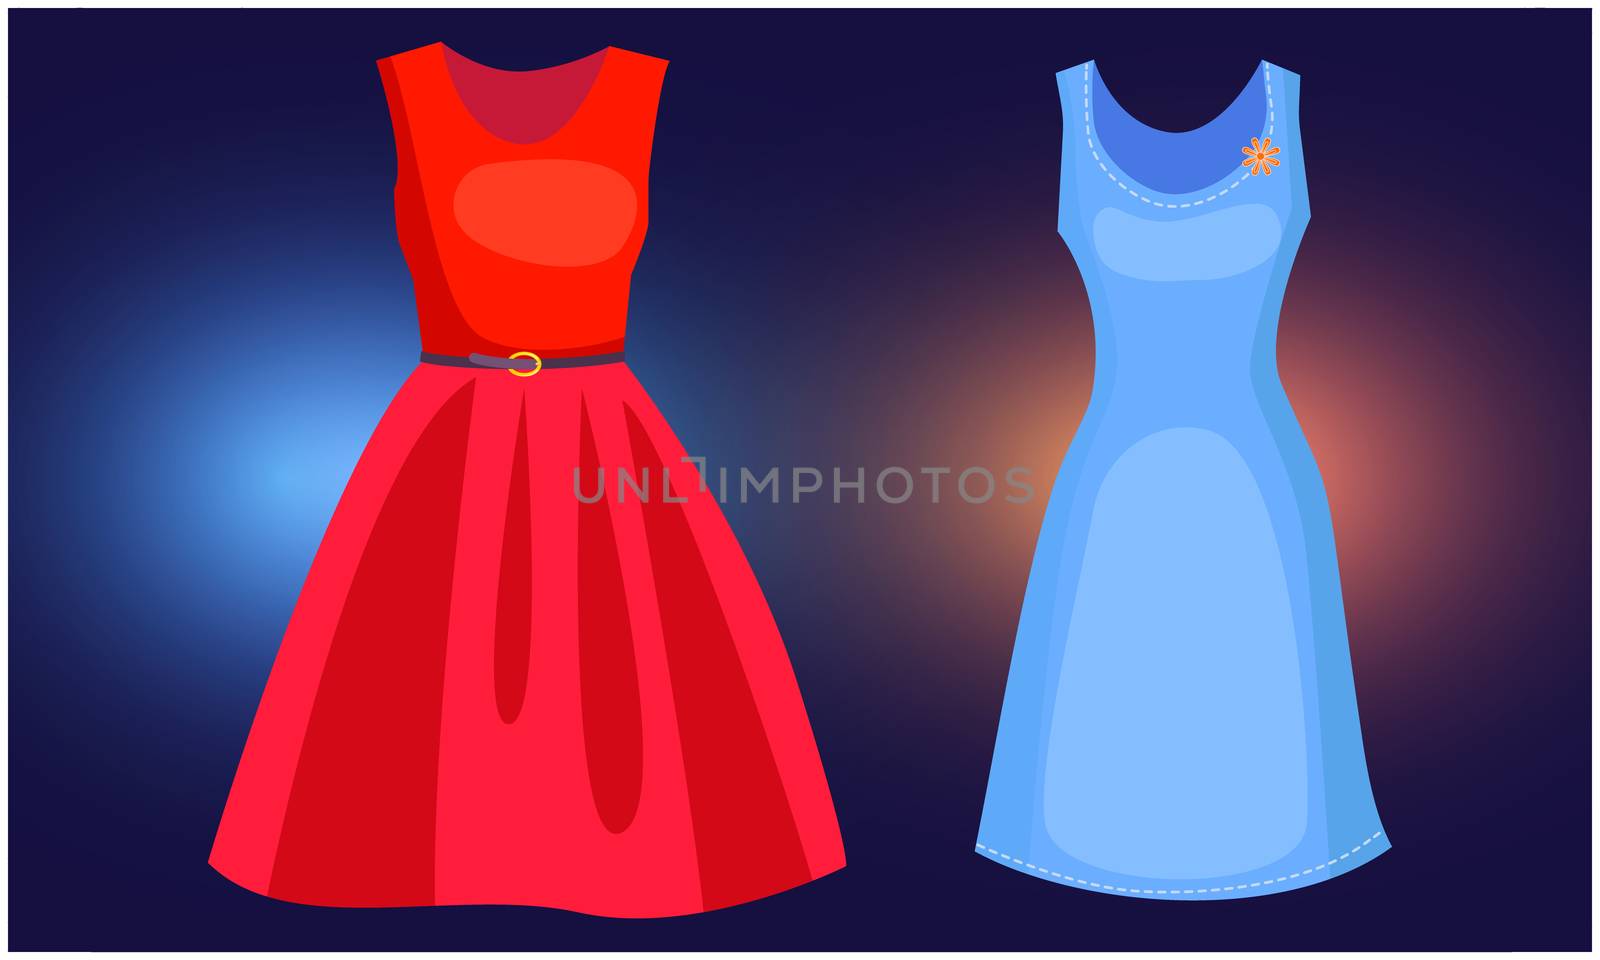 mock up illustration of female fashion wear on abstract background by aanavcreationsplus